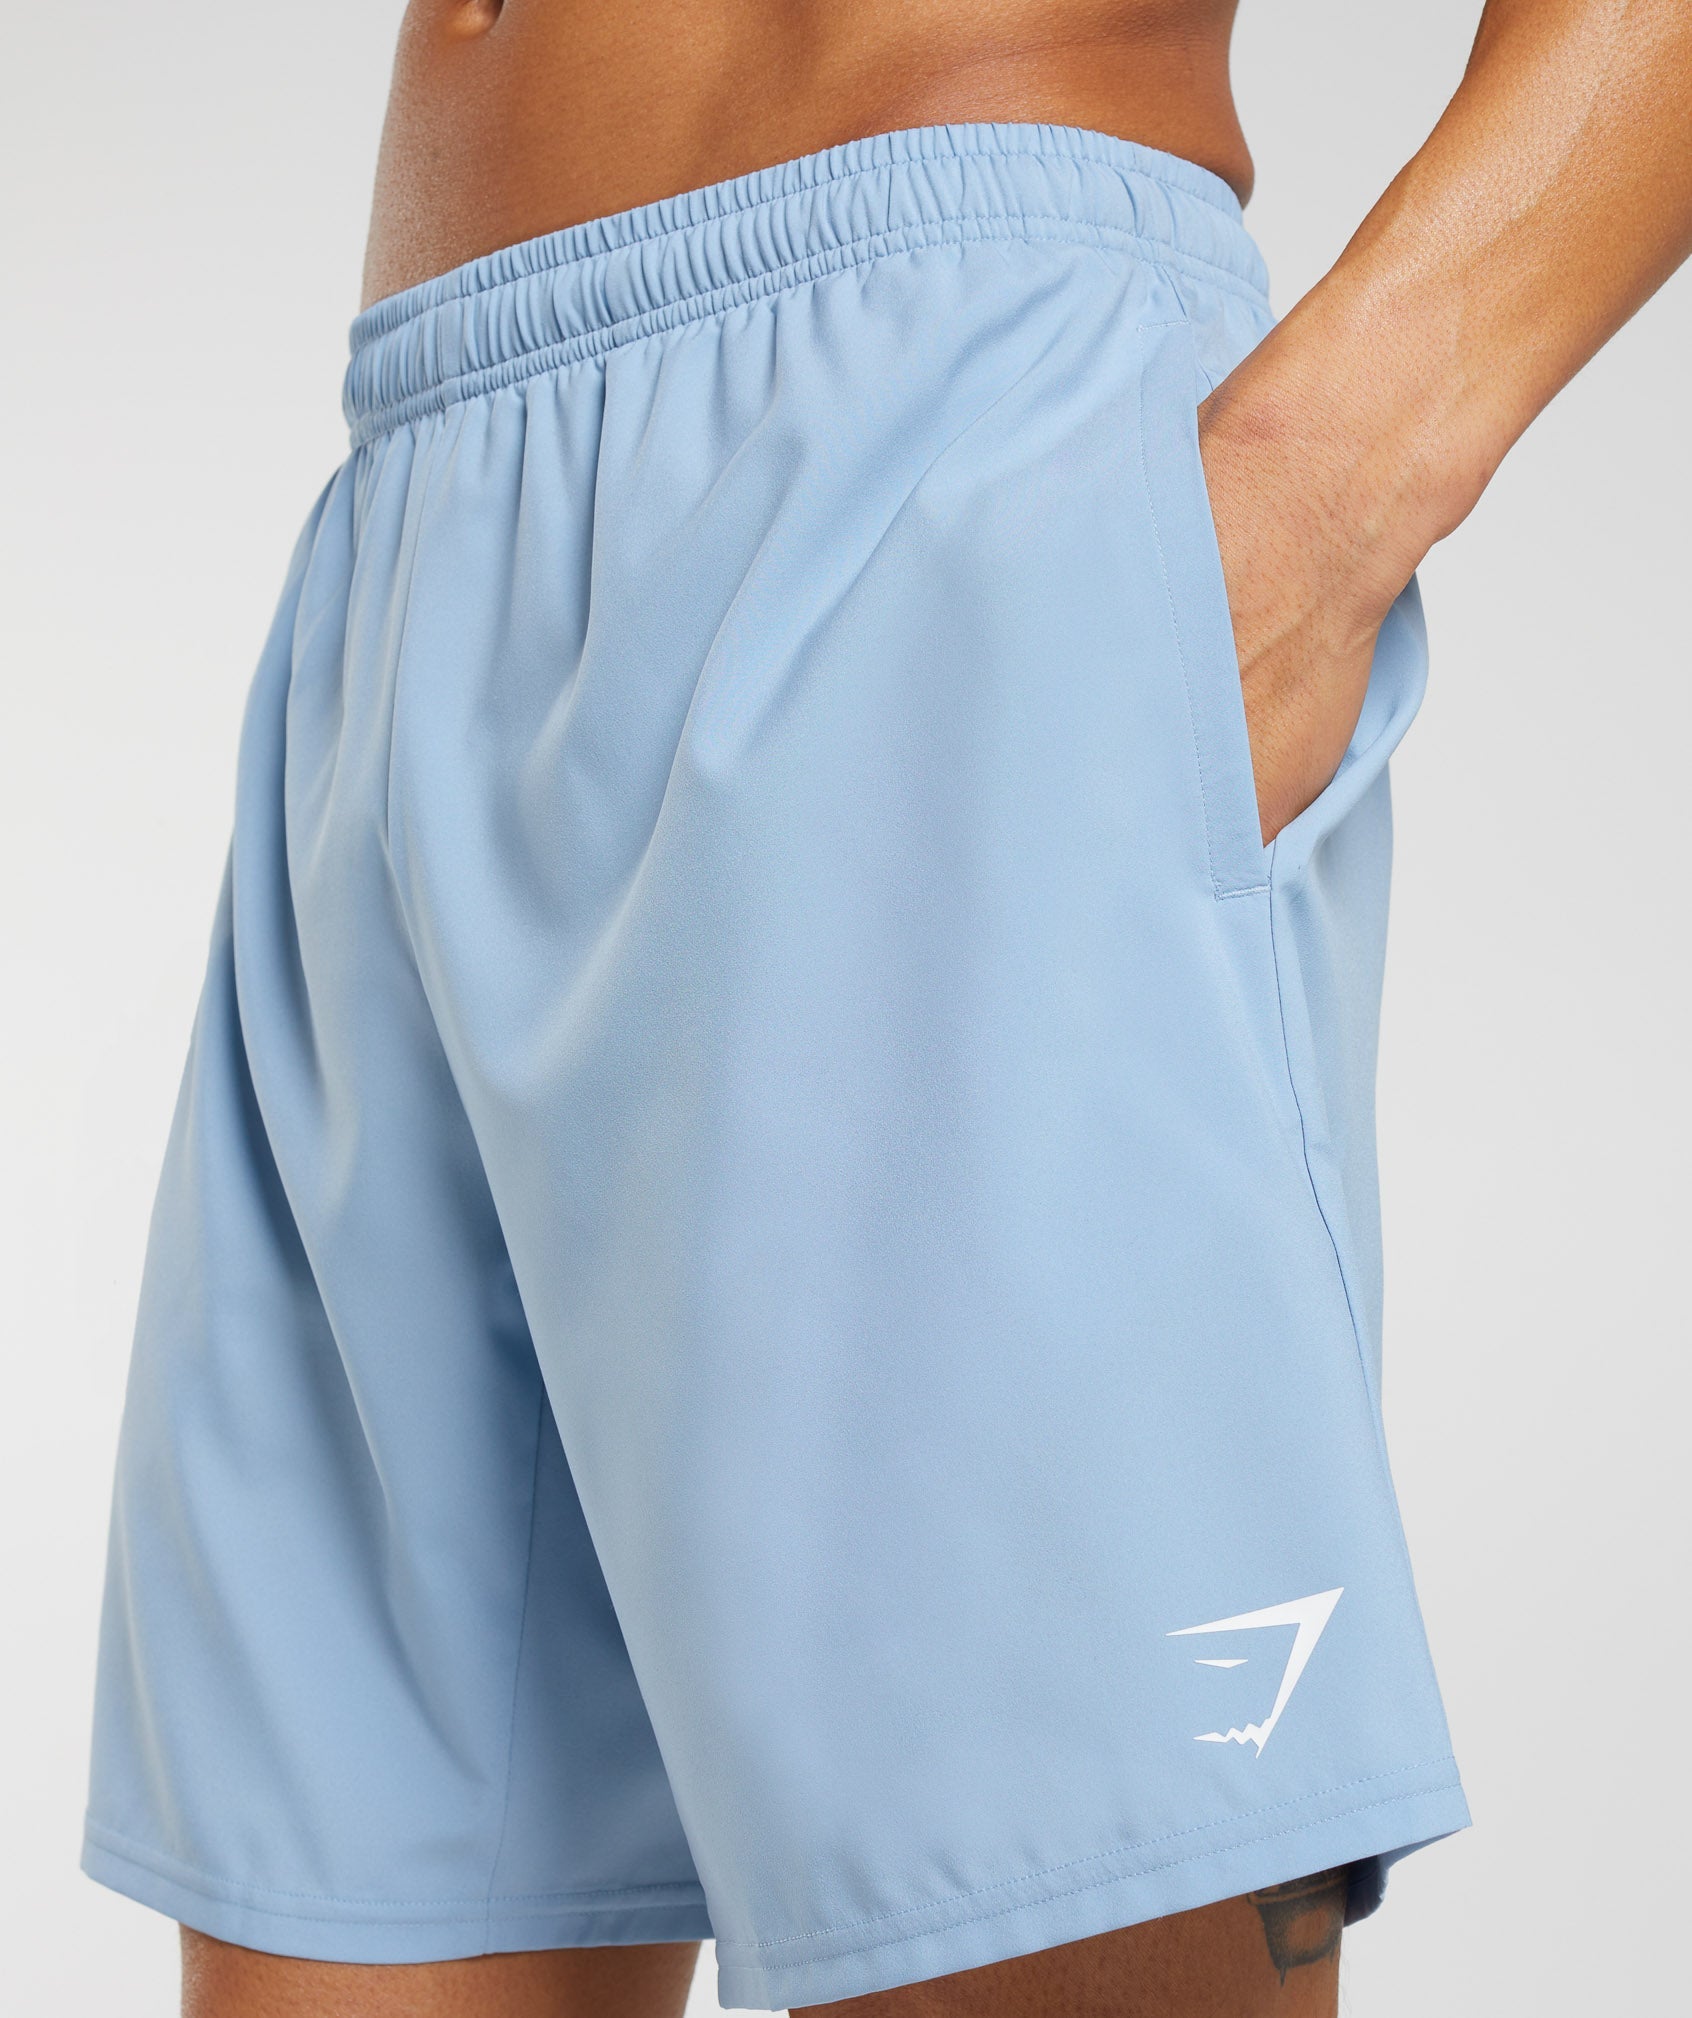 Arrival 7" Shorts in Ozone Blue - view 4